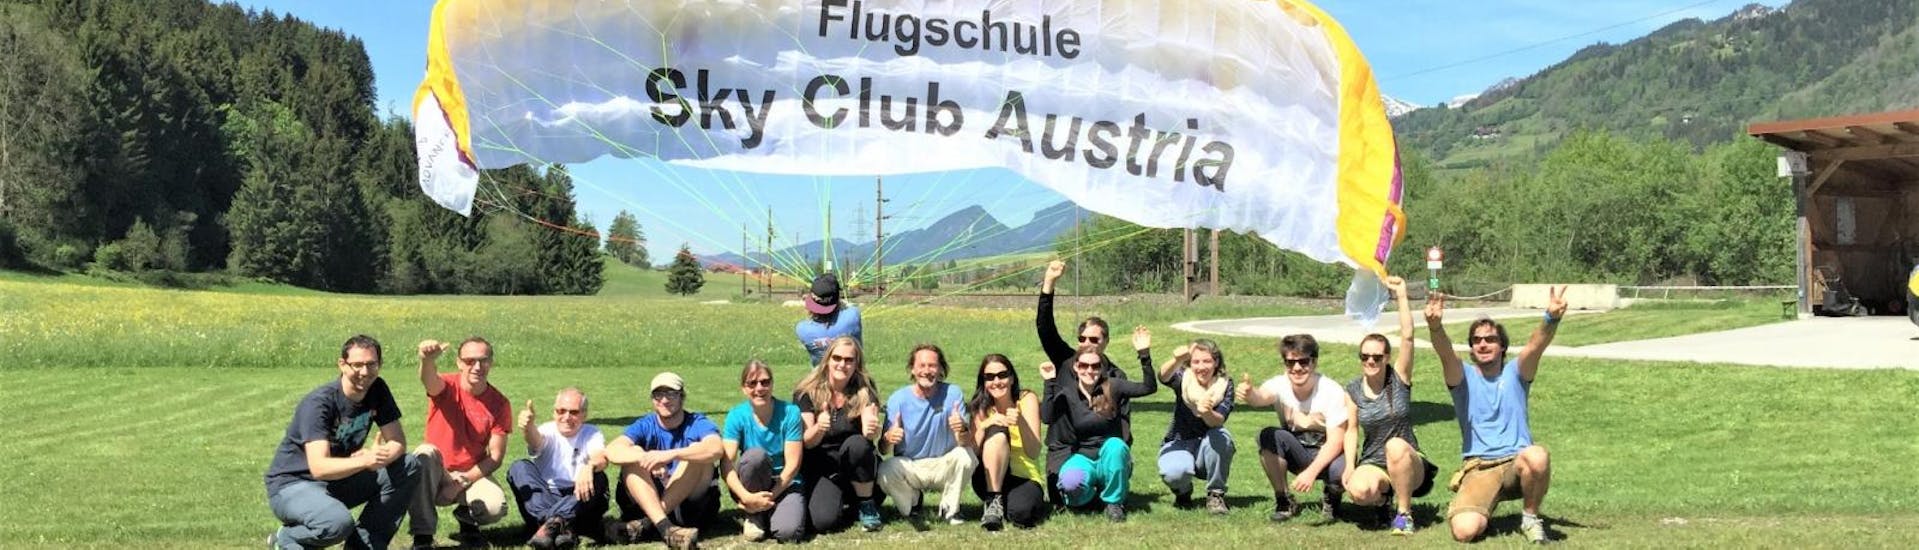 Group picture after the 2-Day Trial Paragliding Course in Gröbming with Flugschule Sky Club Austria Gröbming.